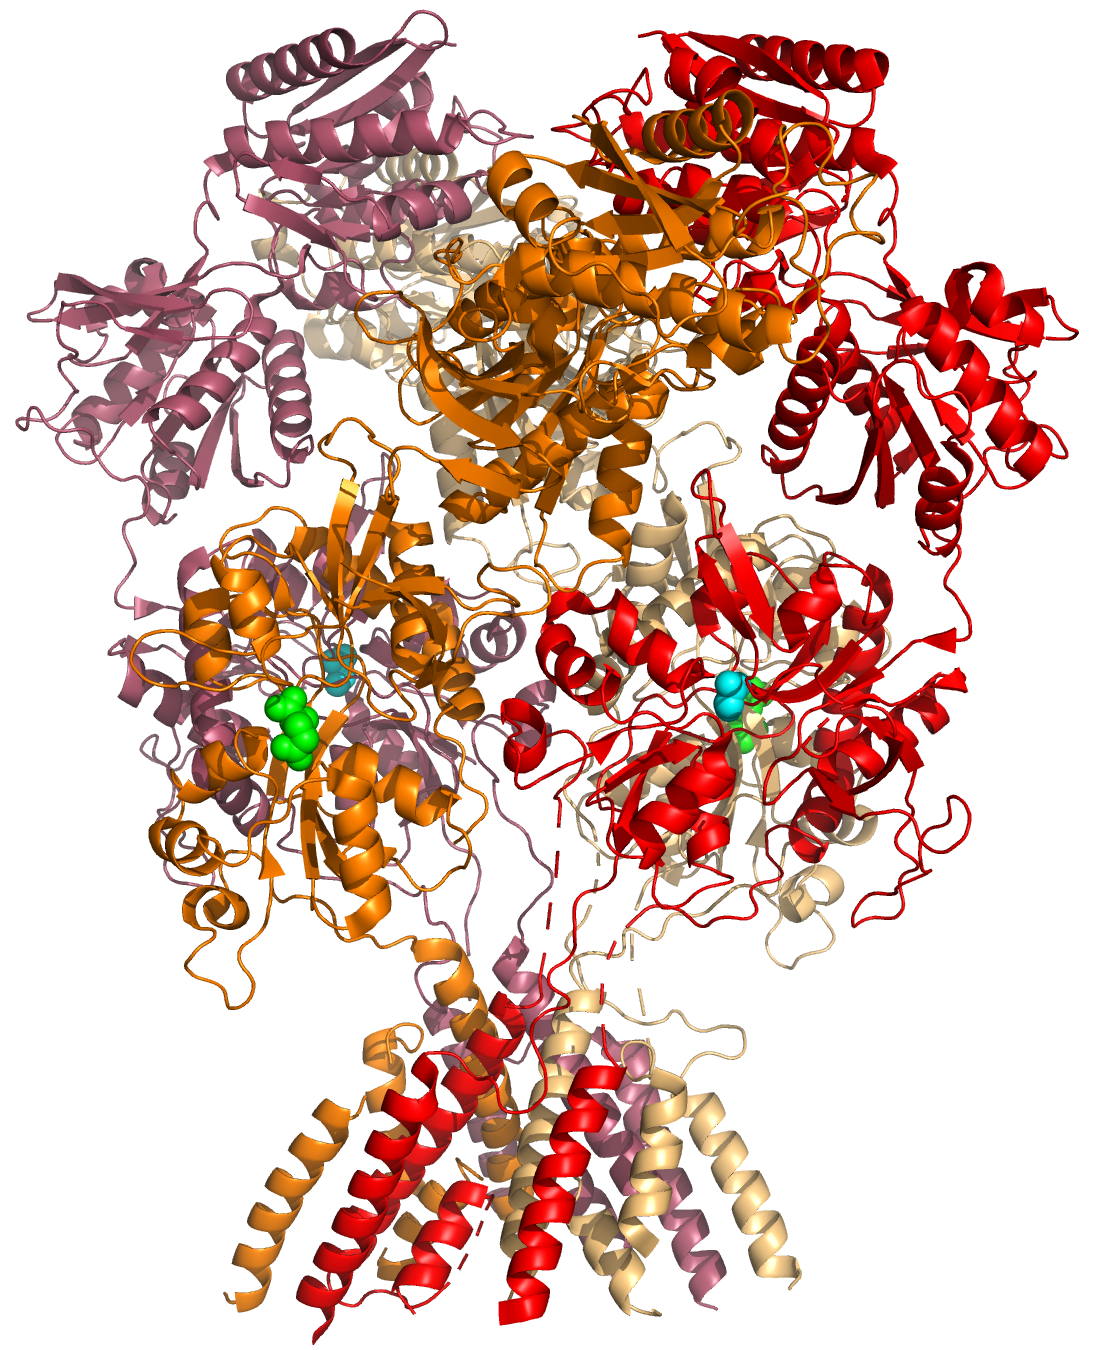 A cartoon representation of the atomic structure of the GluN1a/GluN2B N-Methyl-D-aspartate (NMDA) receptor subtype of the family of ionotropic glutamate receptors. The agonist glutamate (green spheres) is bound to the GluN2B subunit, the co-agonist glycine is bound to the GluN1A subunit. Data from PDB 4PE5, rendered with open source molecular visualization tool PyMol.